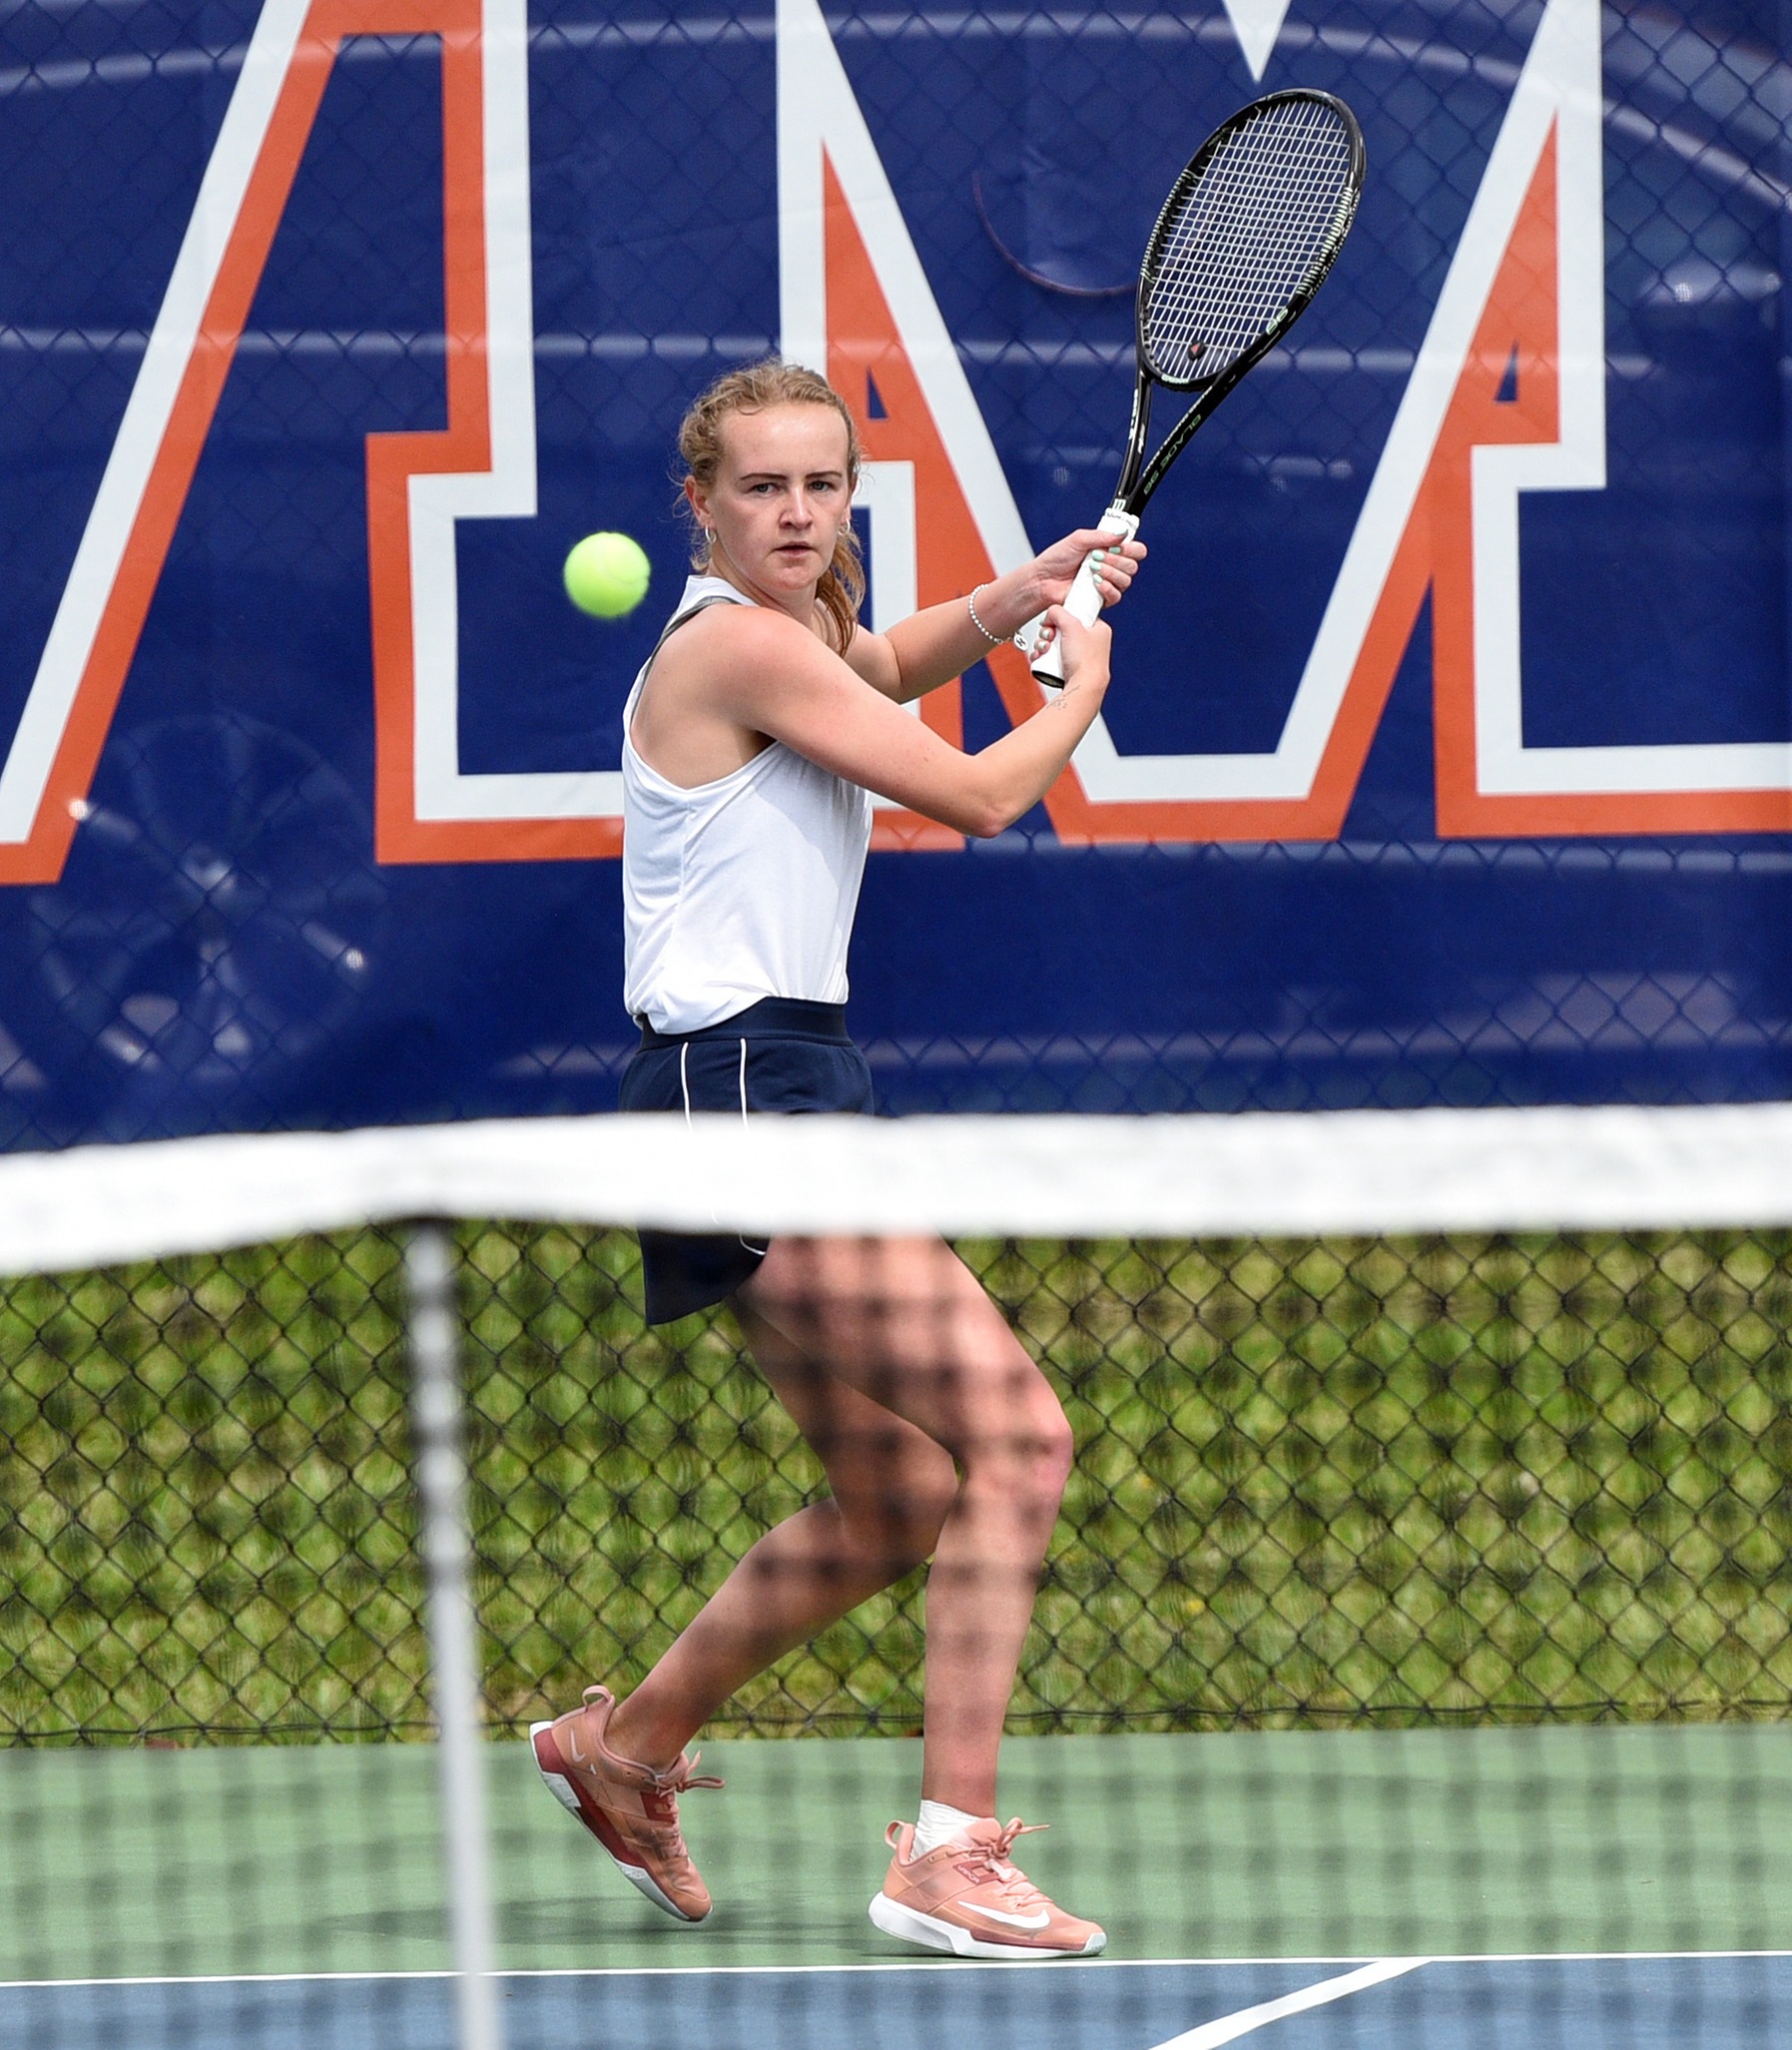 Eagles Return to the Court for ITA Championships